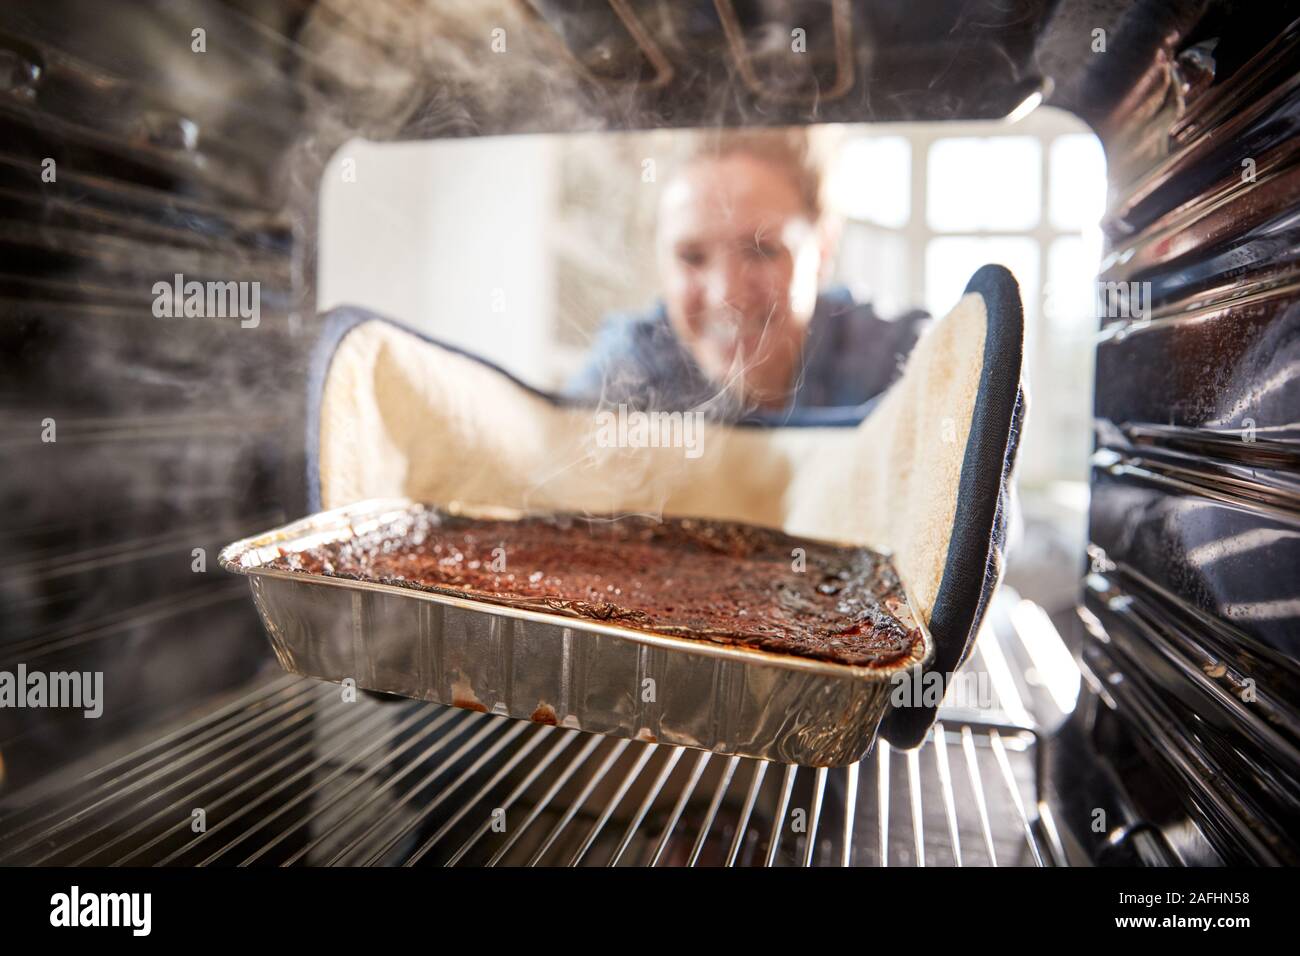 View Looking Out From Inside Oven As Woman Burns Dinner Stock Photo